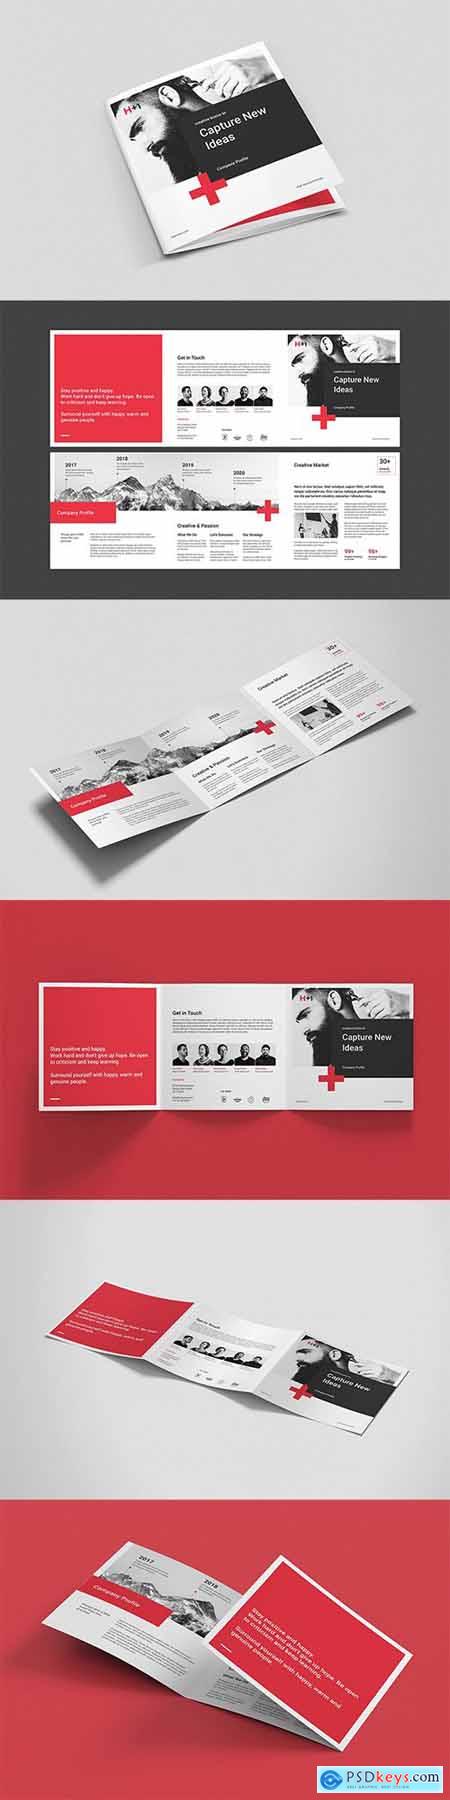 TriFold Business Square Brochure